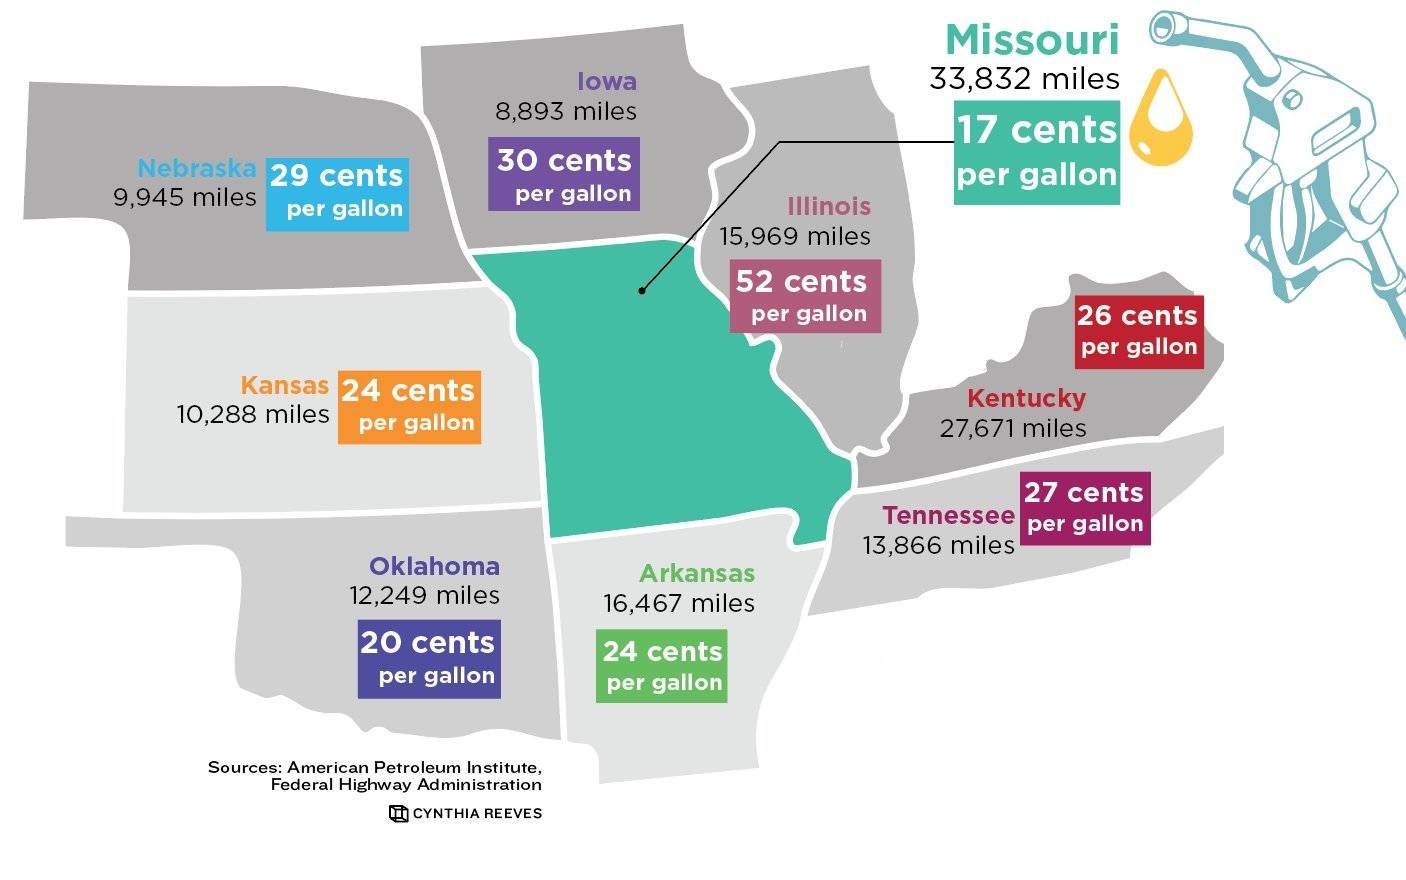 Missouri's current fuel tax rate is lower than any border states. However, its state-maintained highway system is larger than all of them.